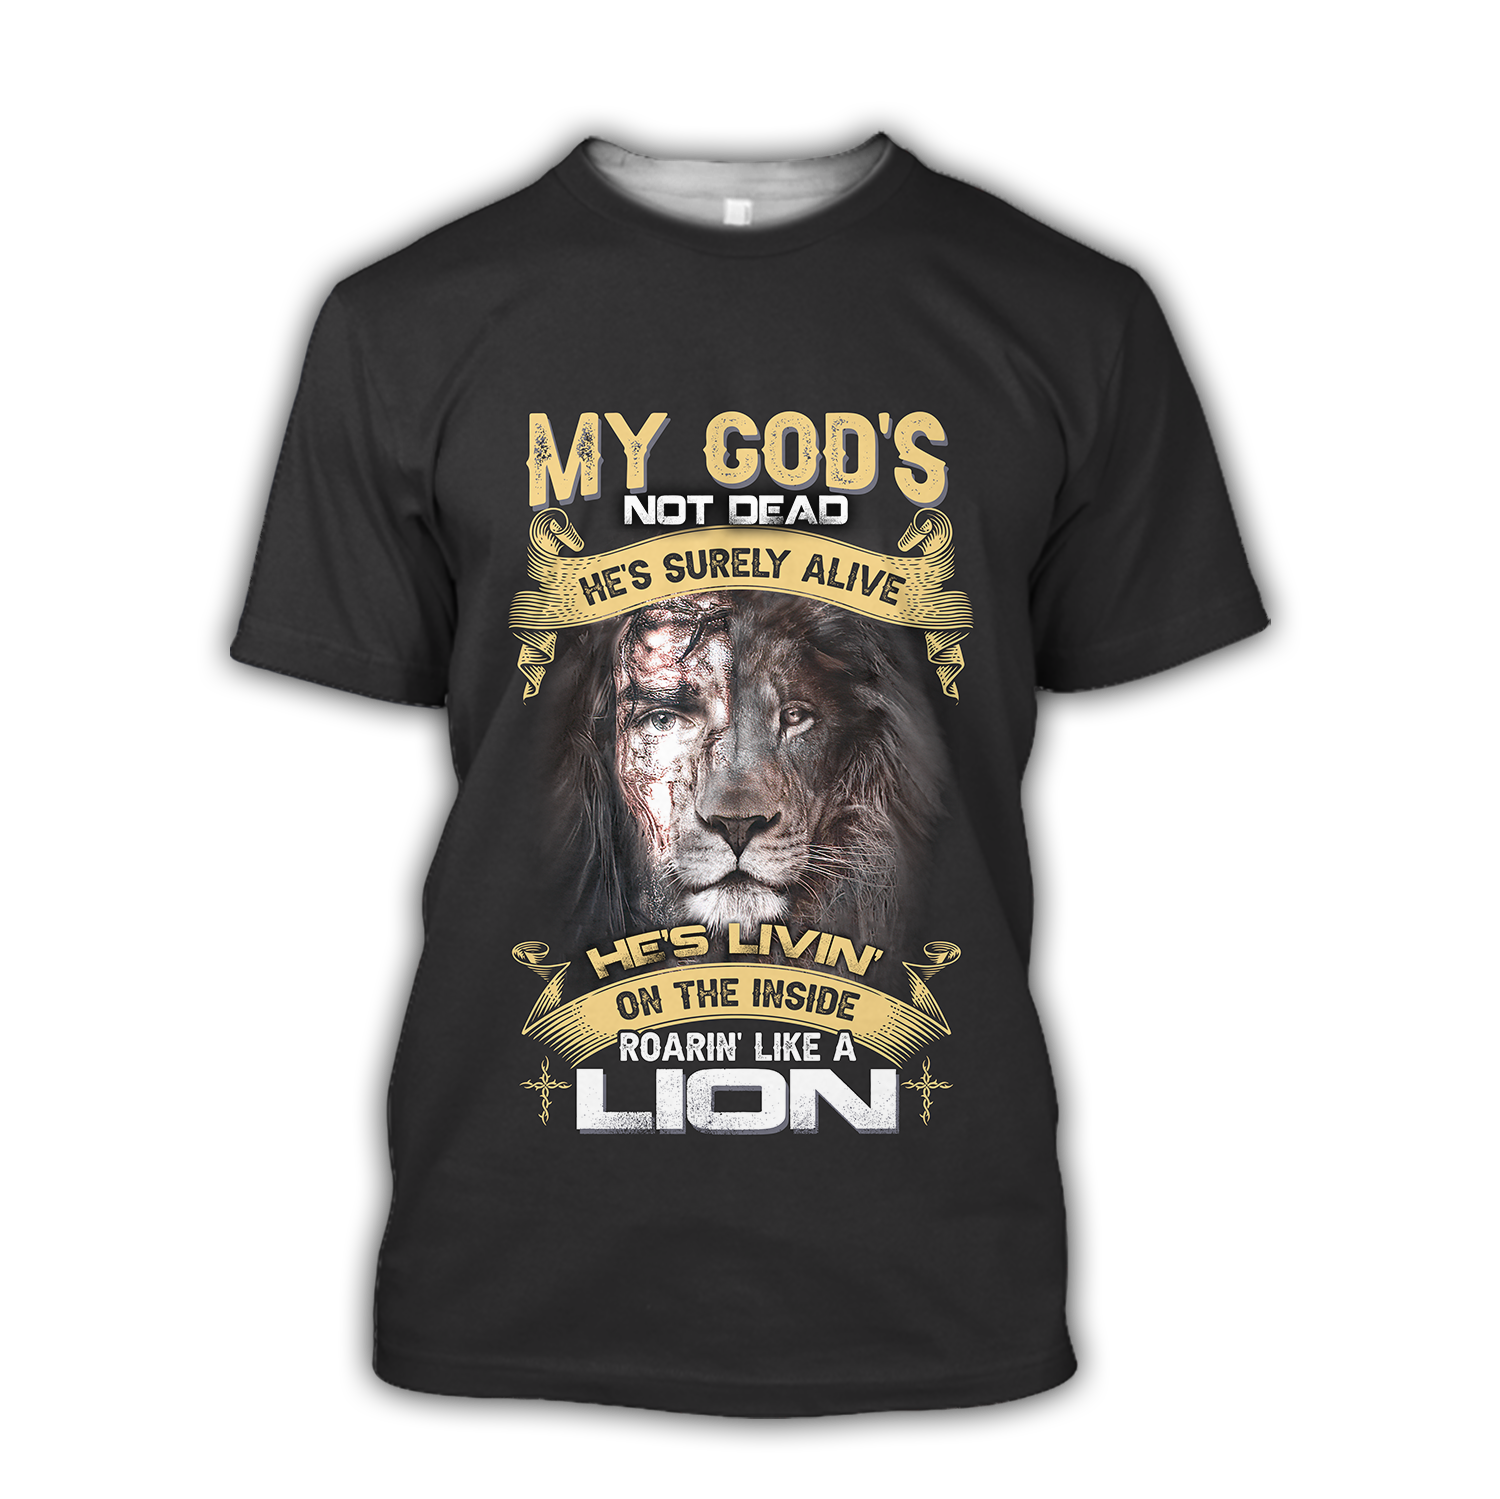 's living on the inside Roarin' like a Lion - T shirt Style for Men Father's Day Gift